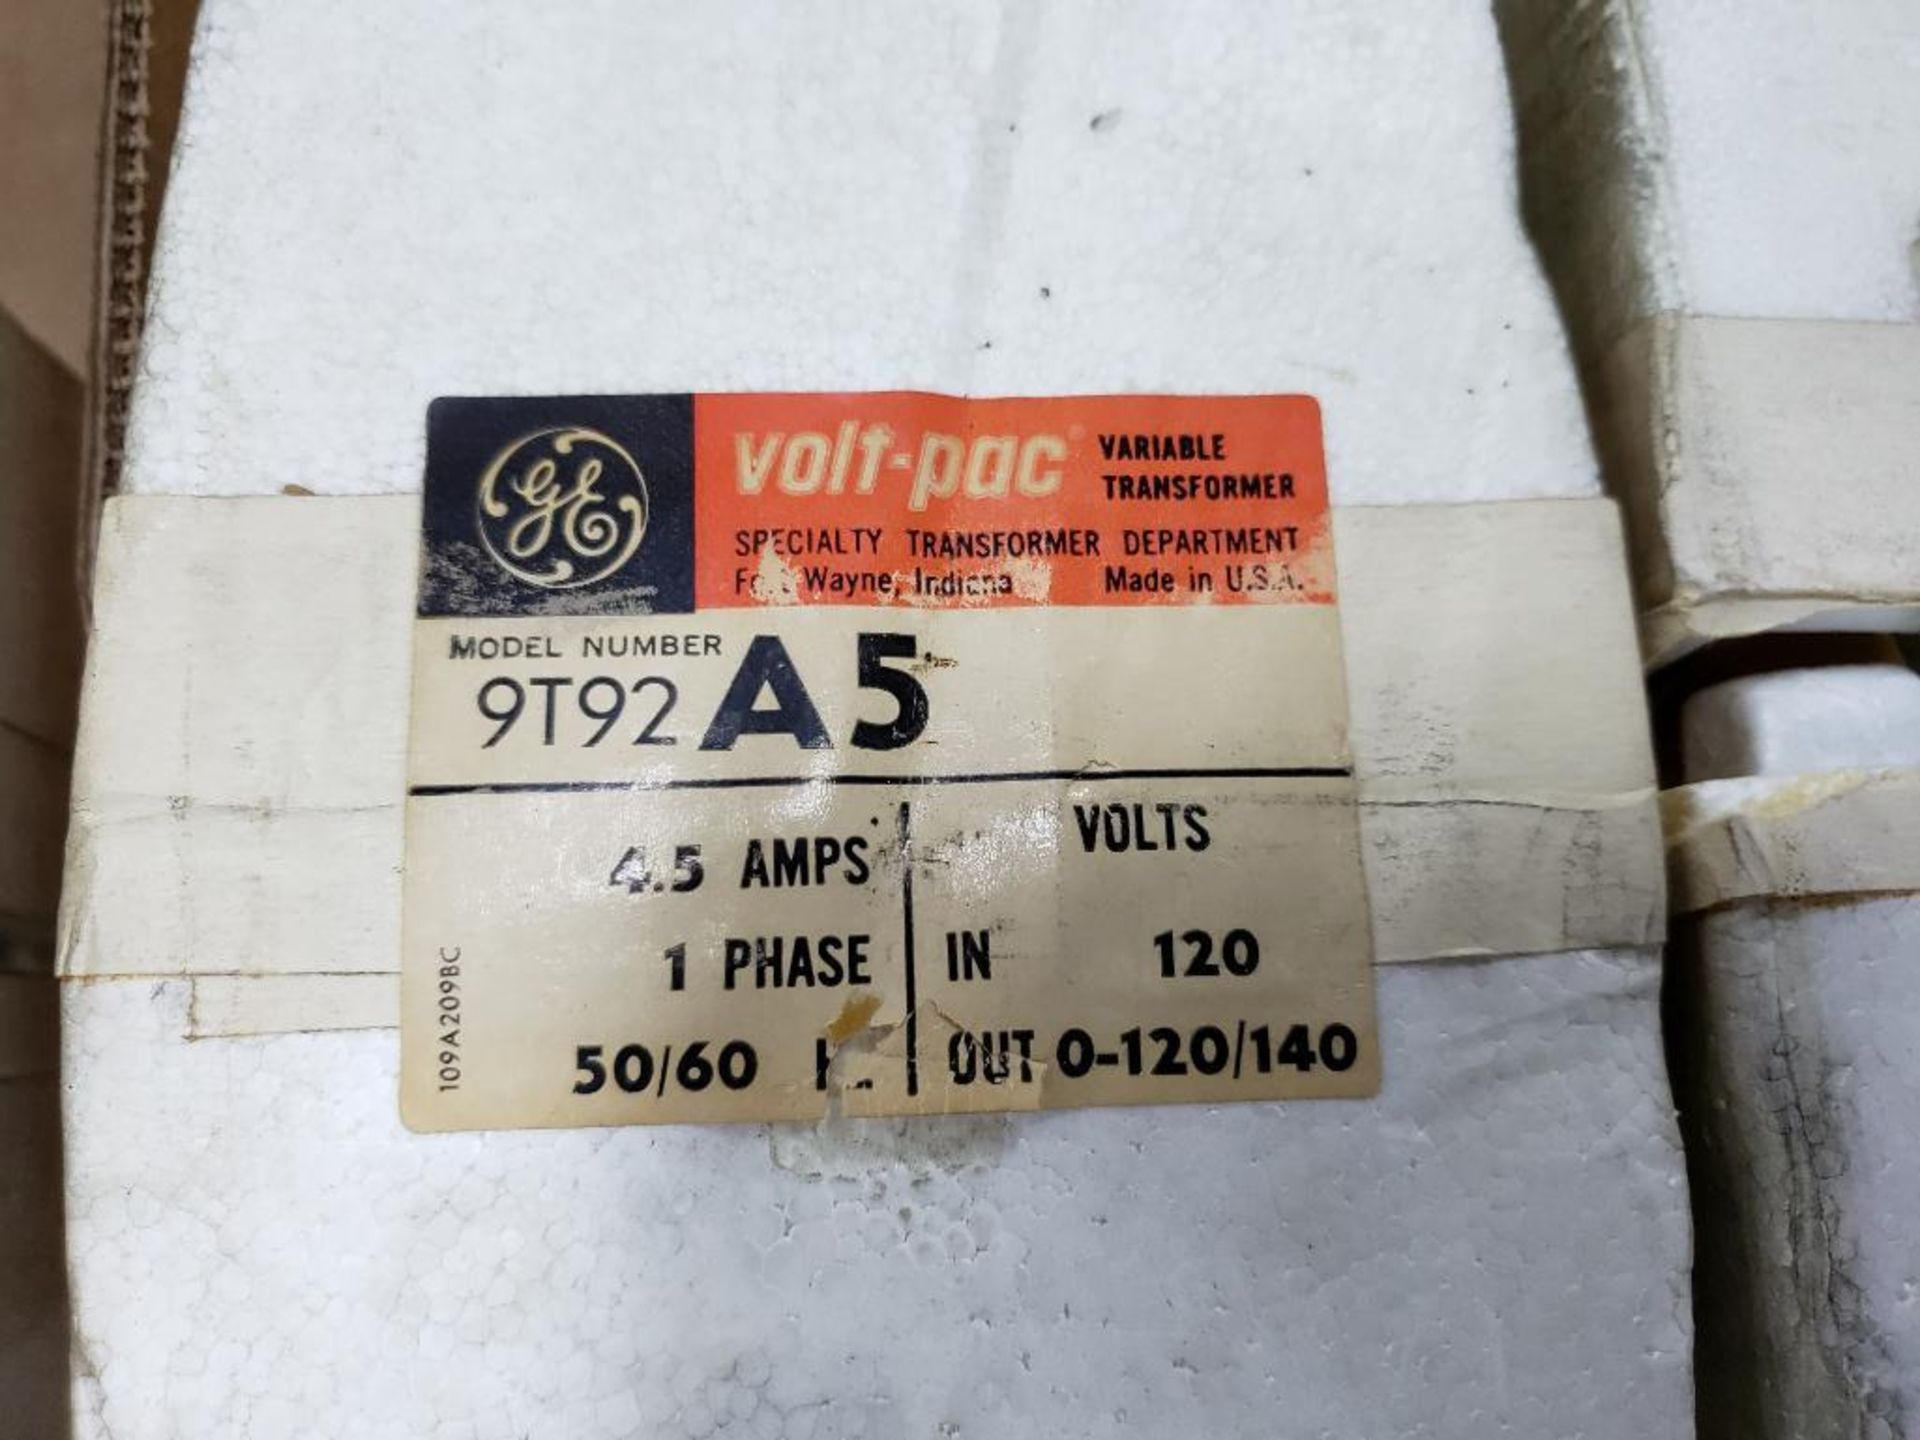 Qty 2 - GE Volt-pac variable transformers. Model 9T92A5. New in package. - Image 2 of 3